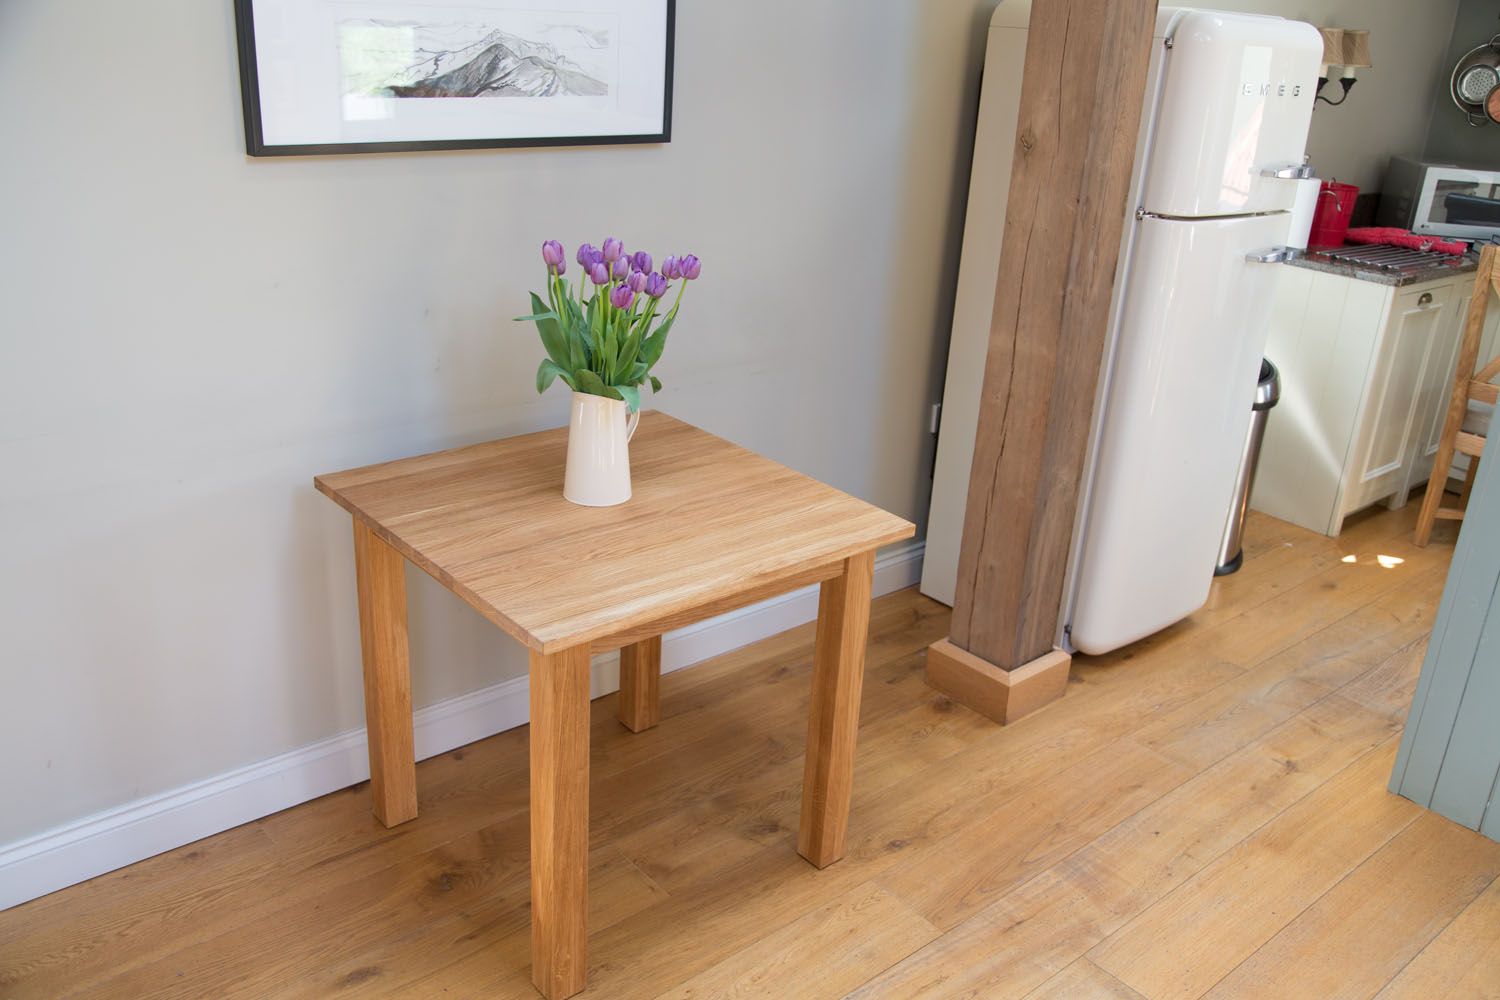 Minsk 80cm Small Square Solid Oak Dining Table - 40% OFF WINTER SALE